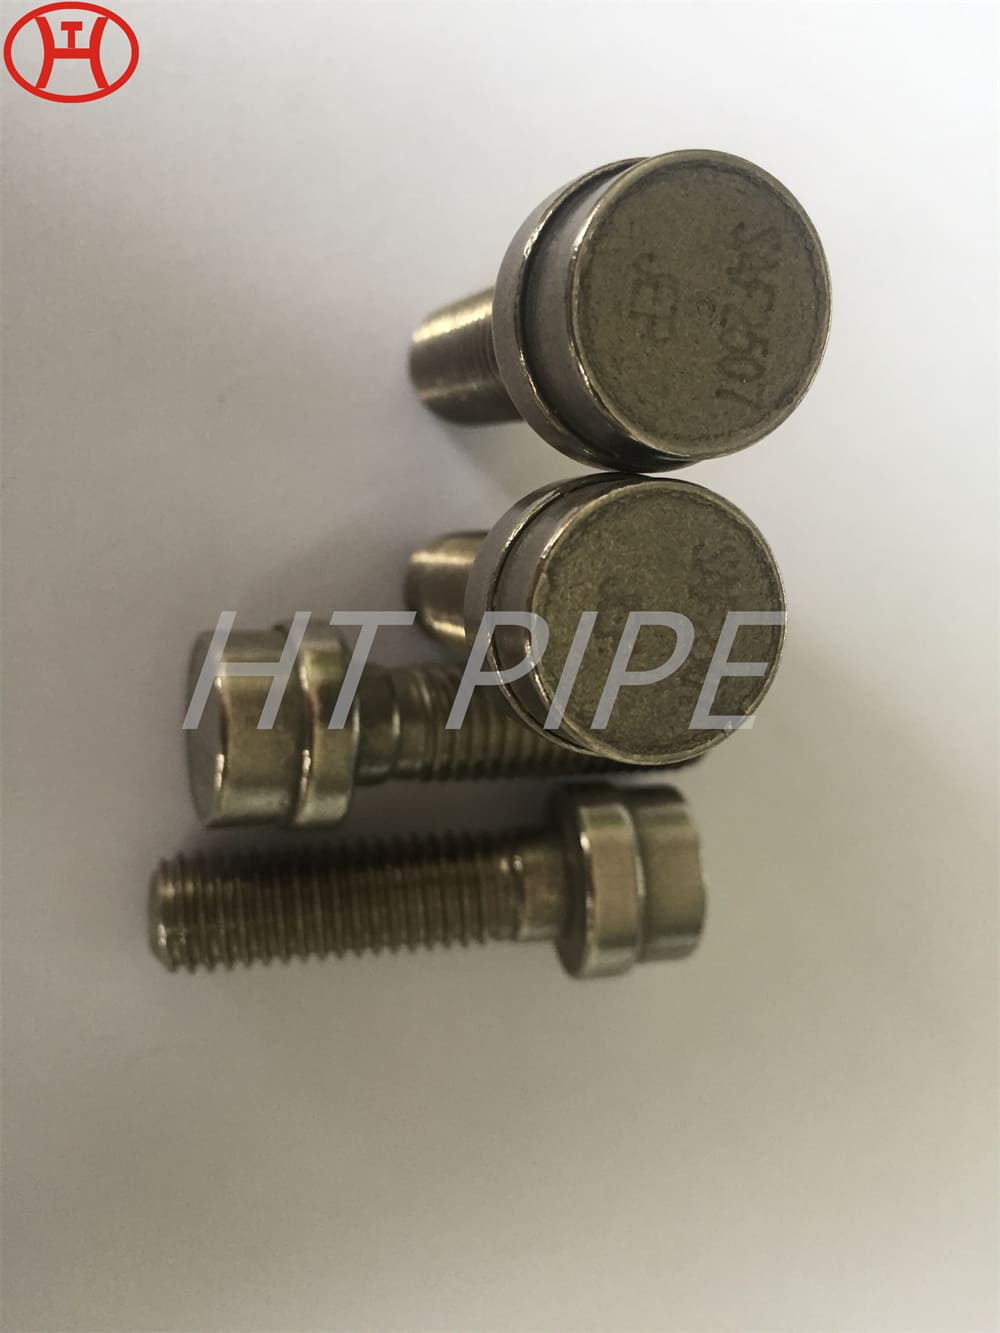 DIN931 933 UNS N07725 Inconel 725 Alloy 725 round head hex bolt